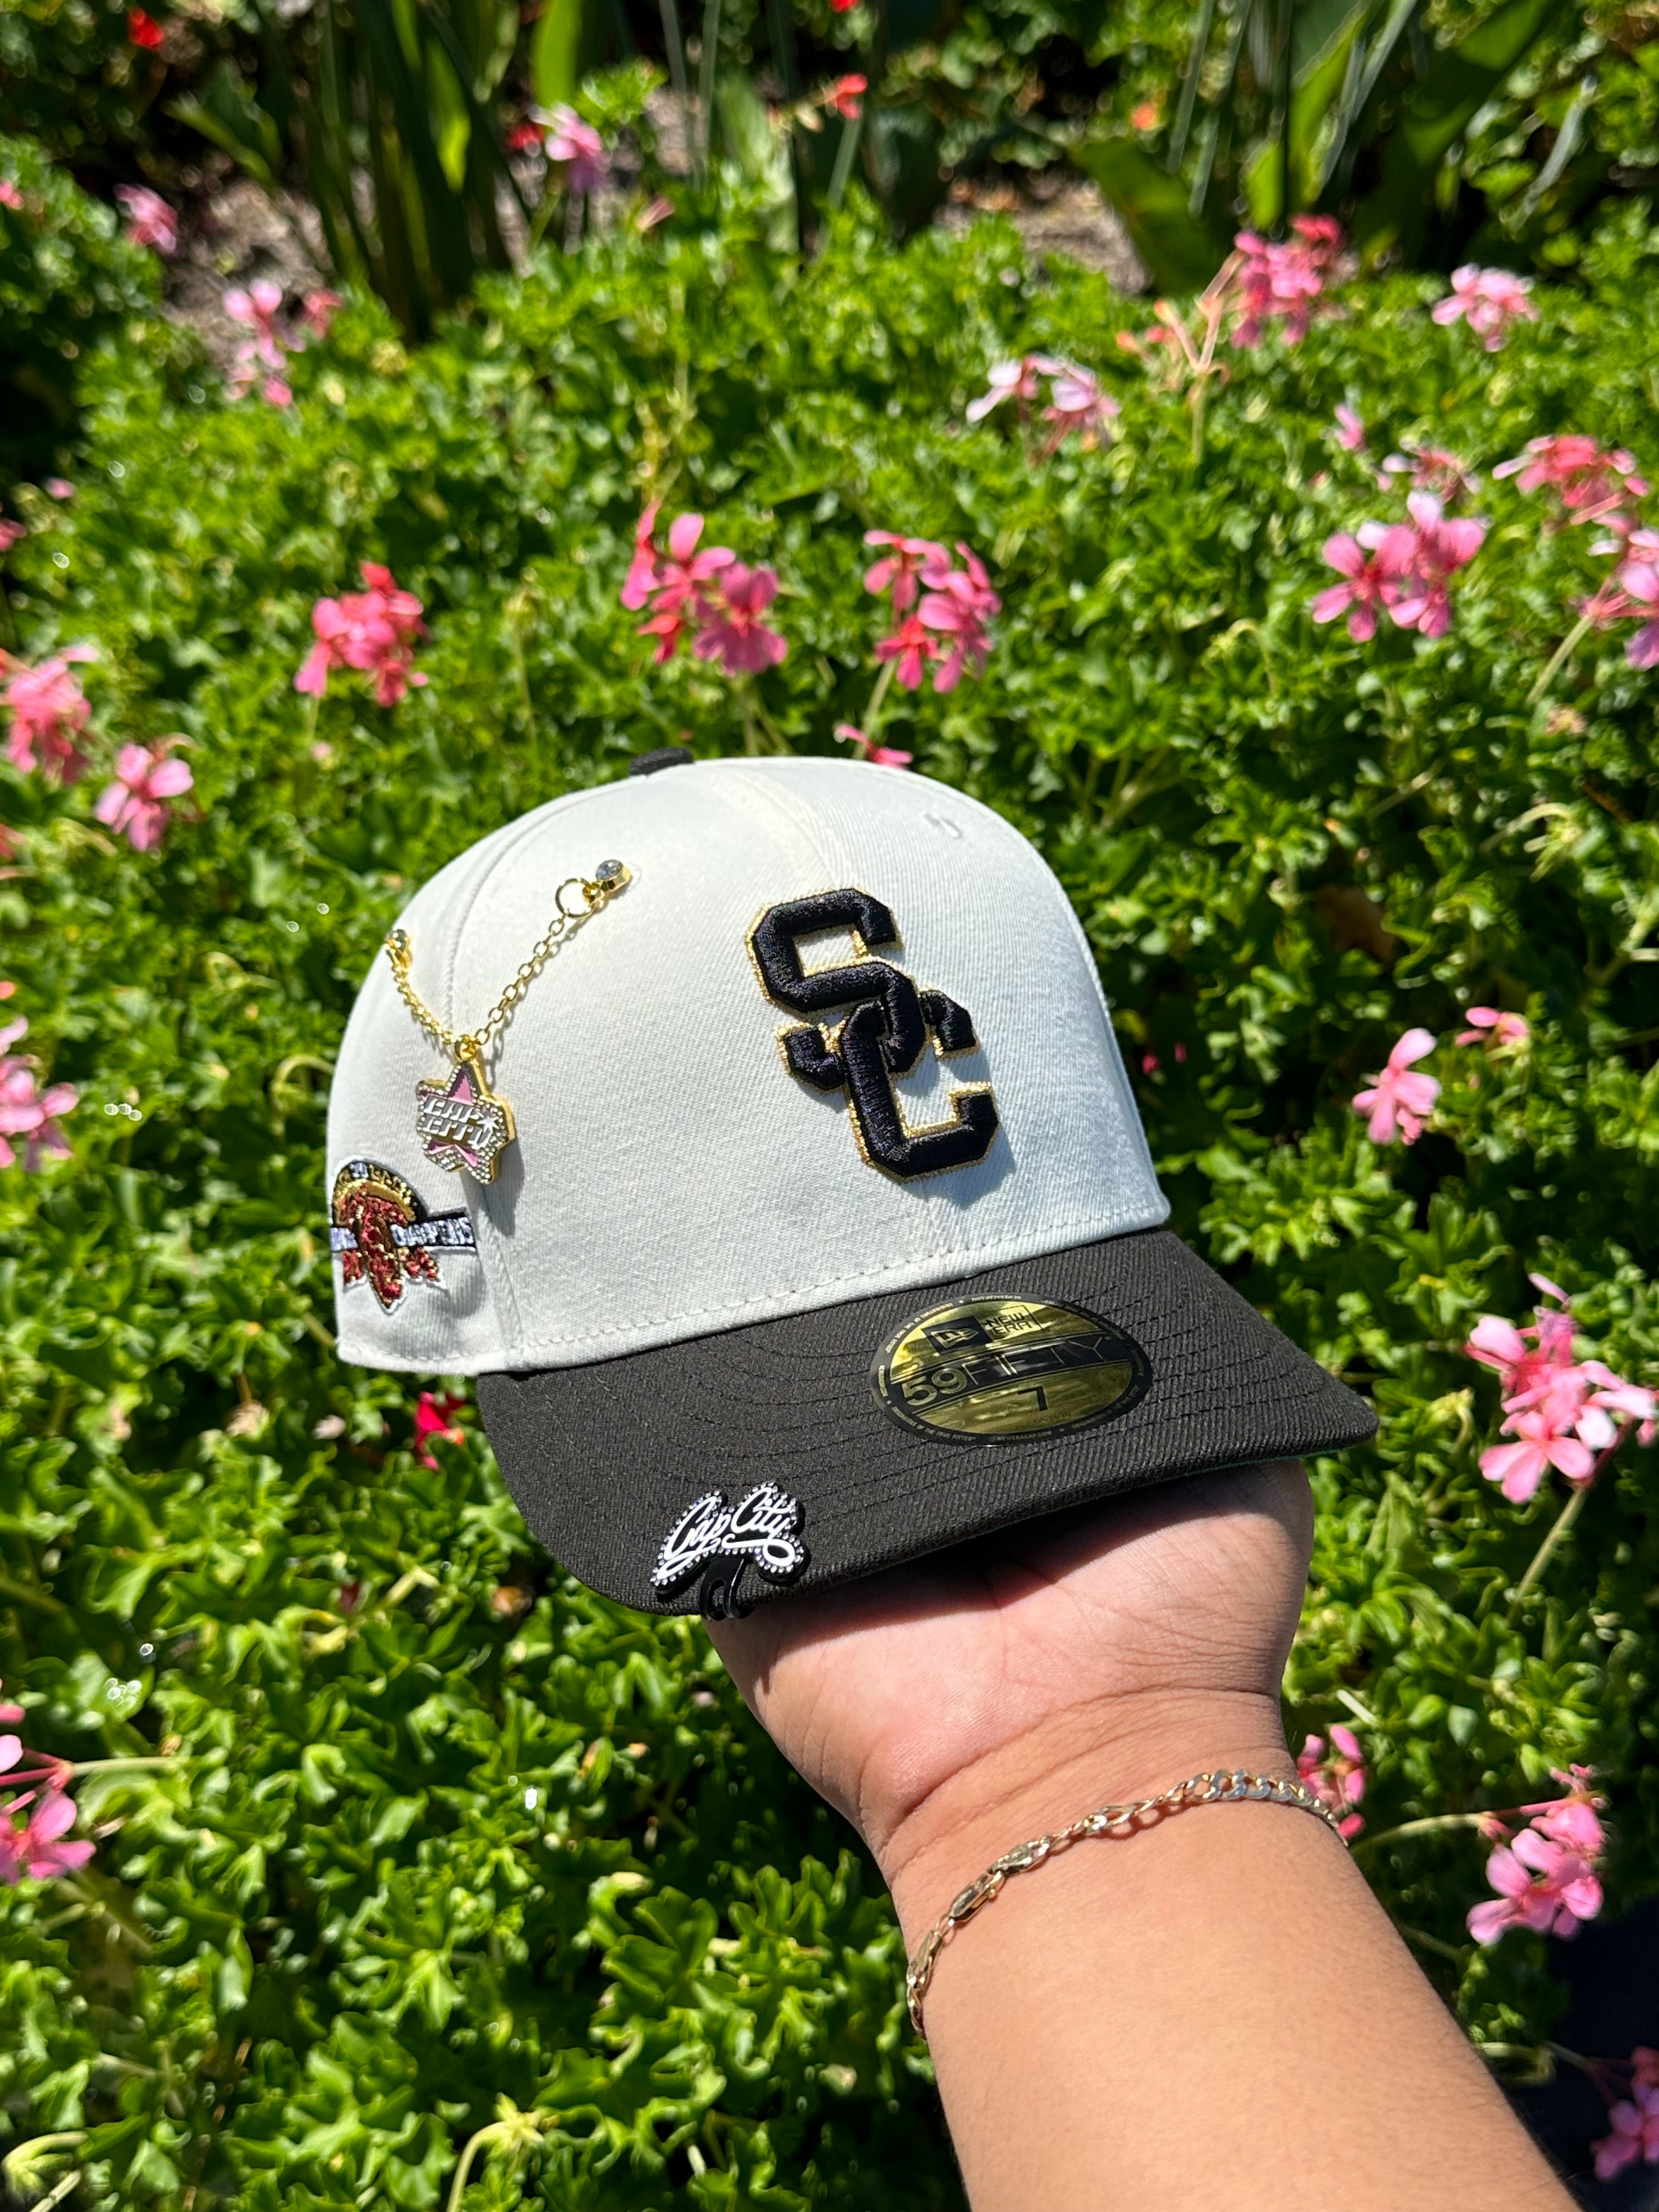 NEW ERA EXCLUSIVE 59FIFTY CHROME WHITE/BLACK "USC TROJANS" W/ BACK TO BACK CHAMPIONS SIDE PATCH